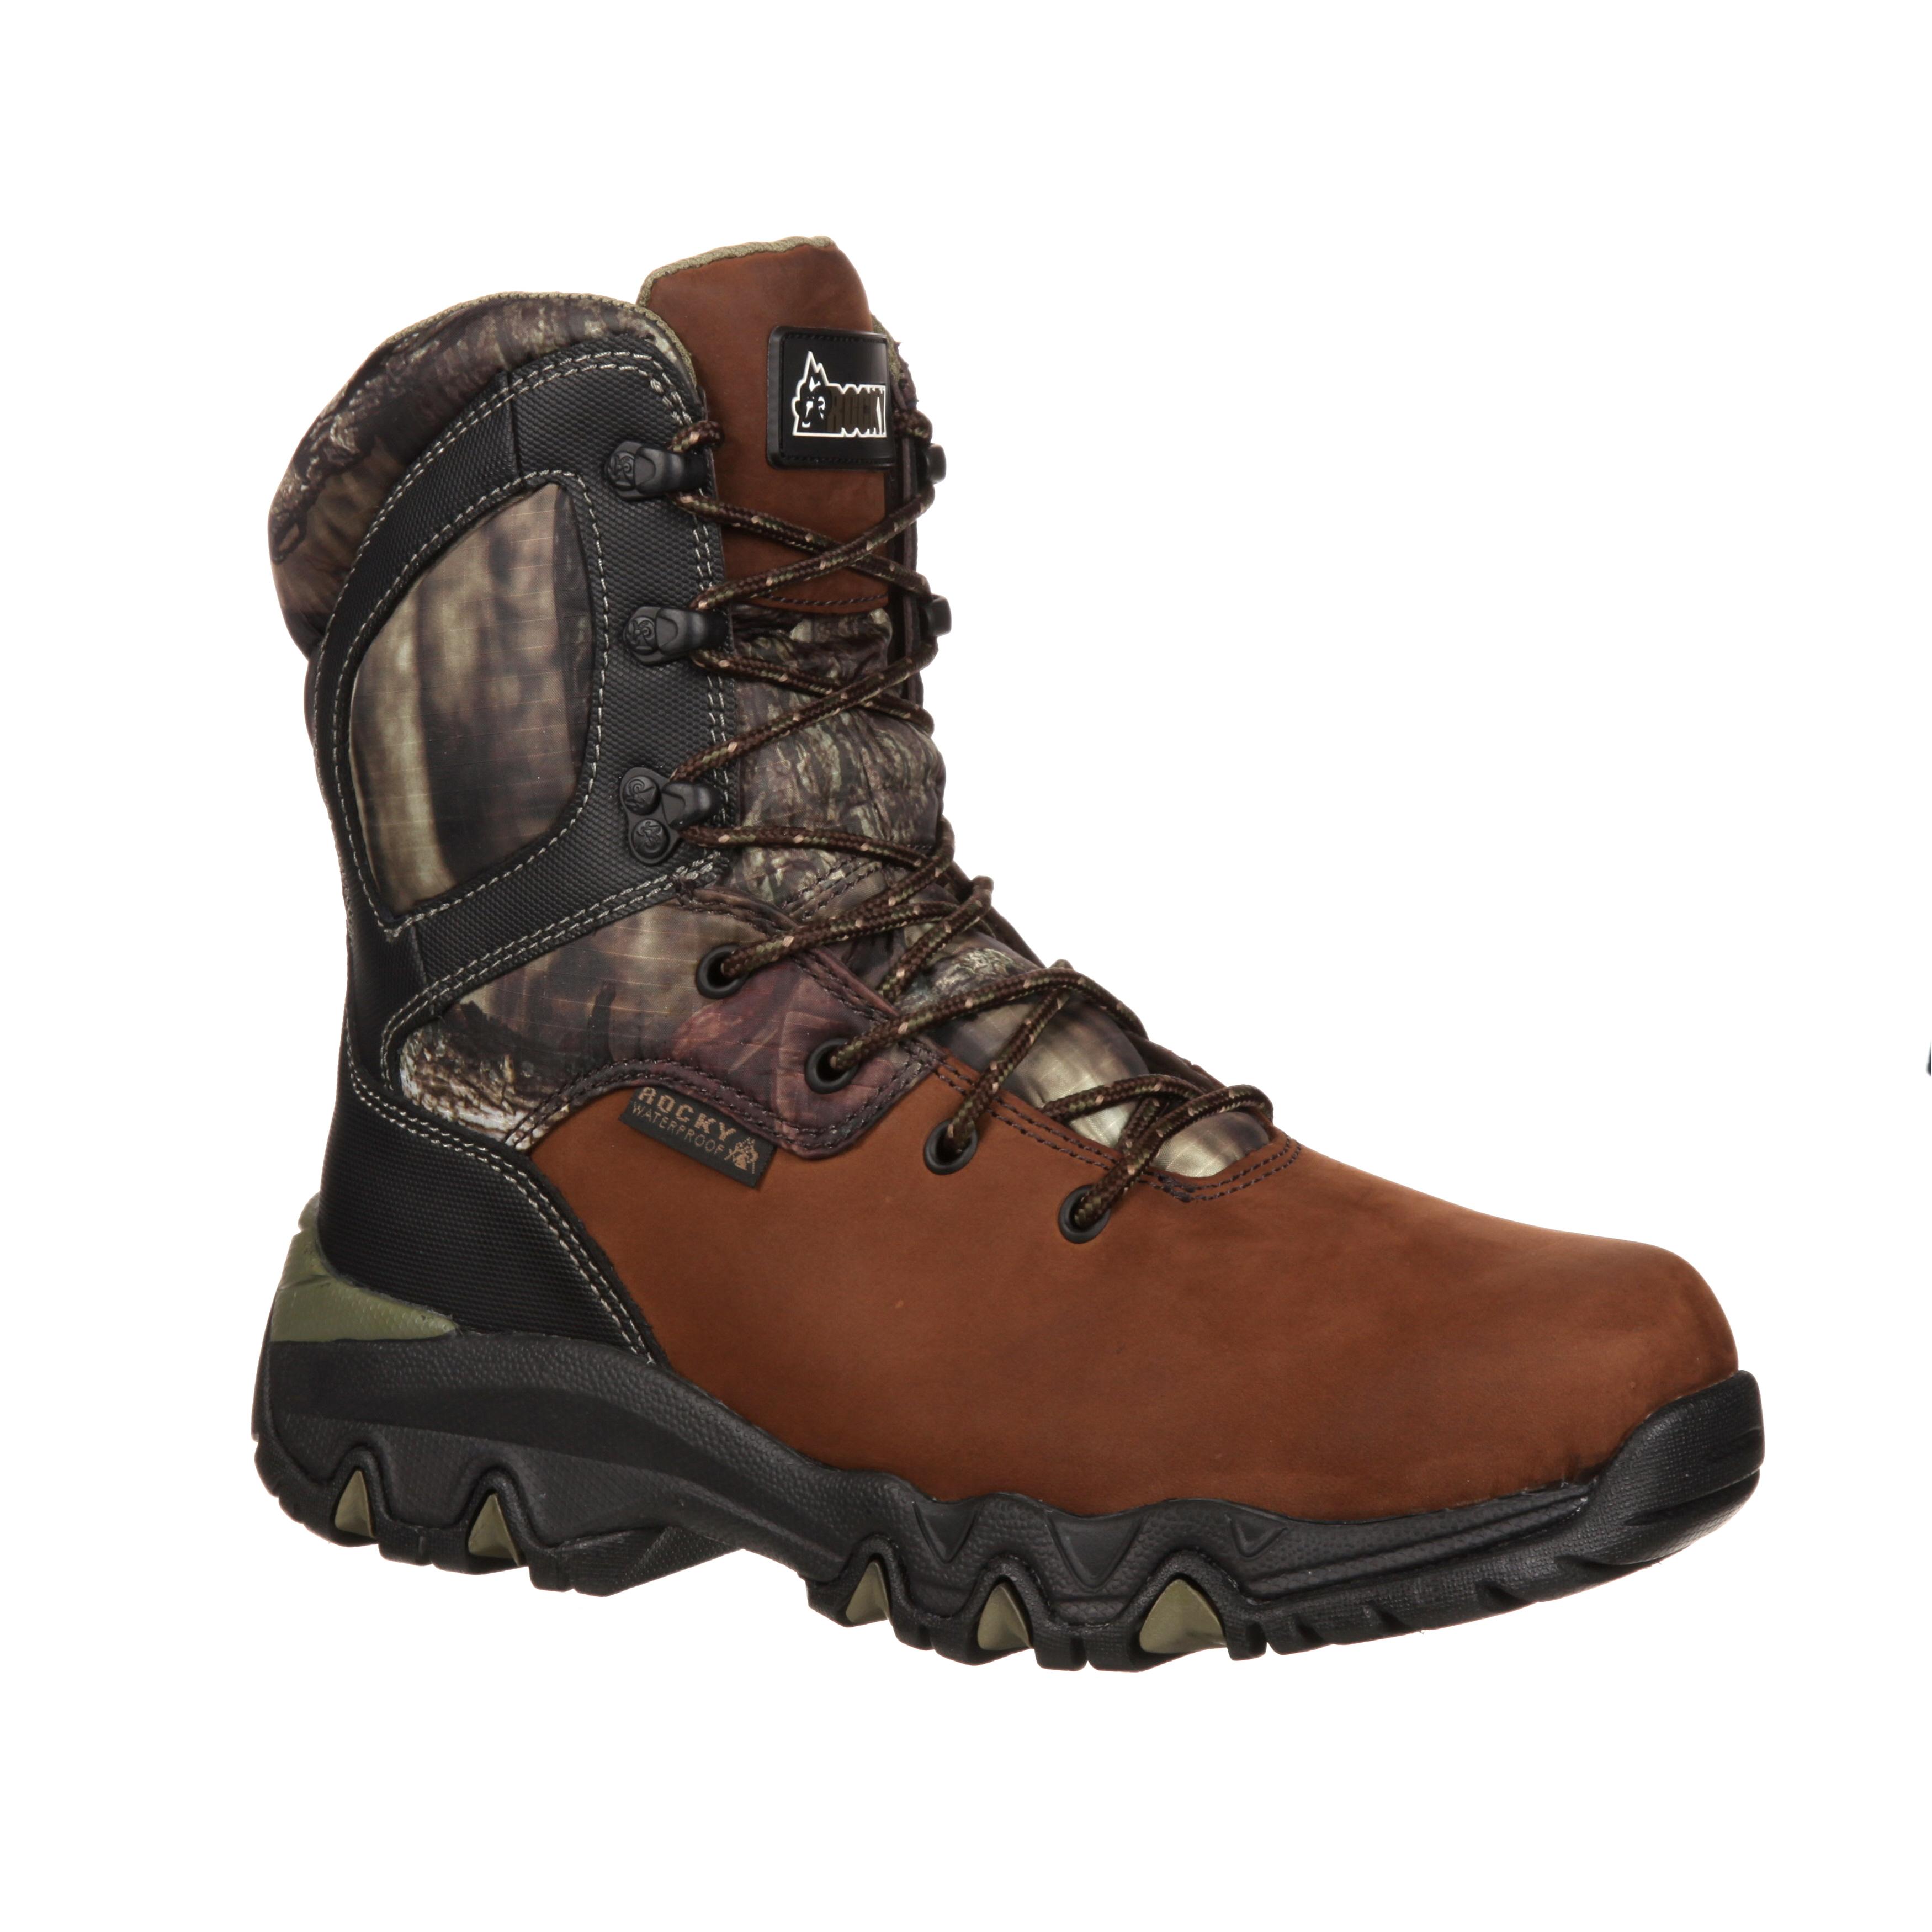 Rocky BigFoot Waterproof Insulated Outdoor Boots. Brown and camouflage ...